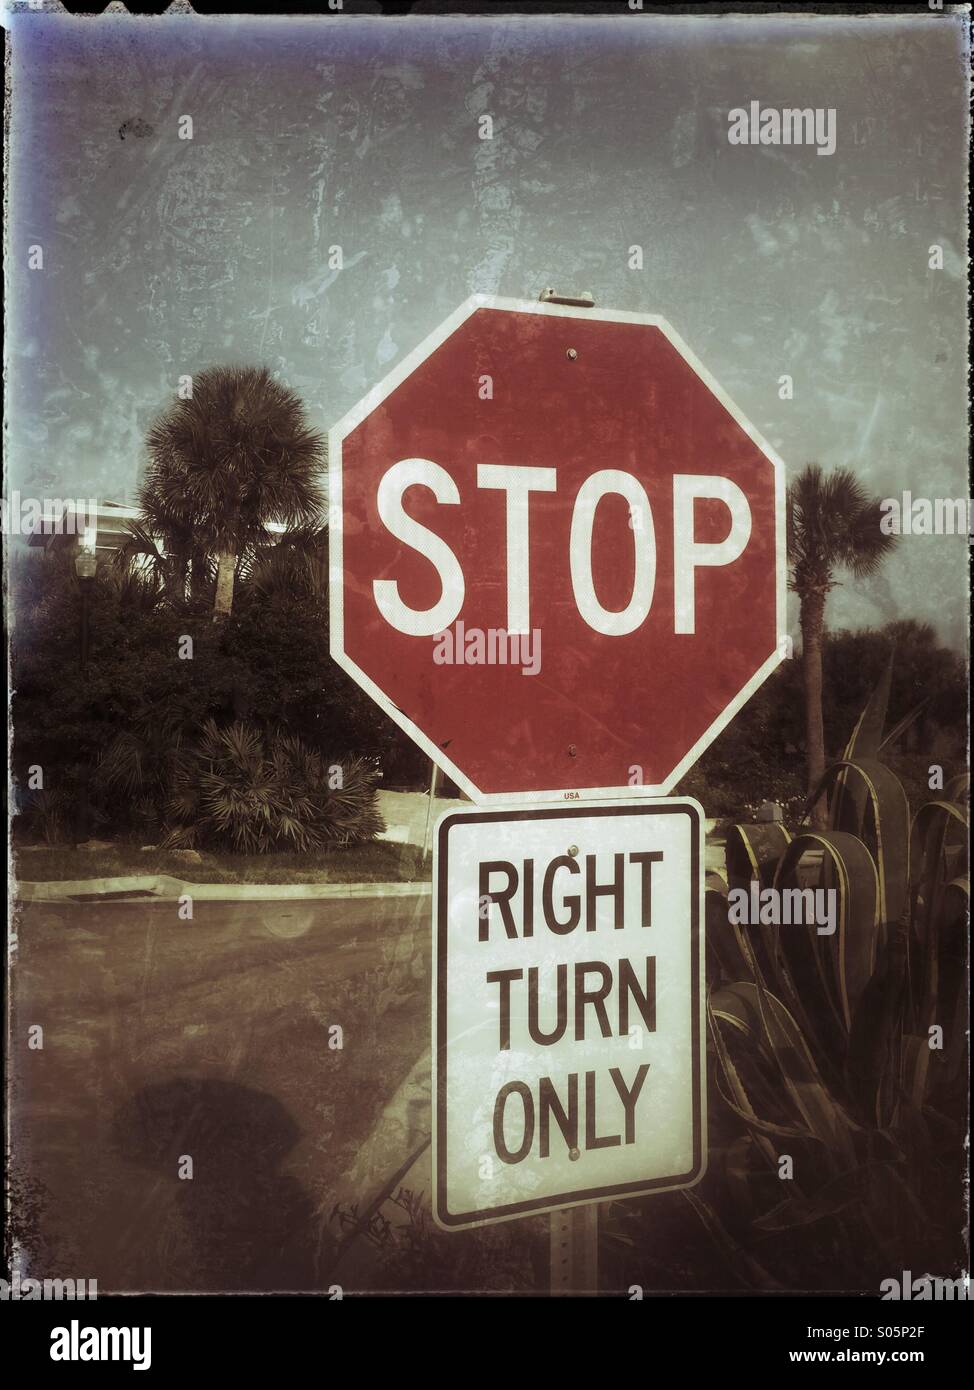 Stop, right turn only road sign. Stock Photo